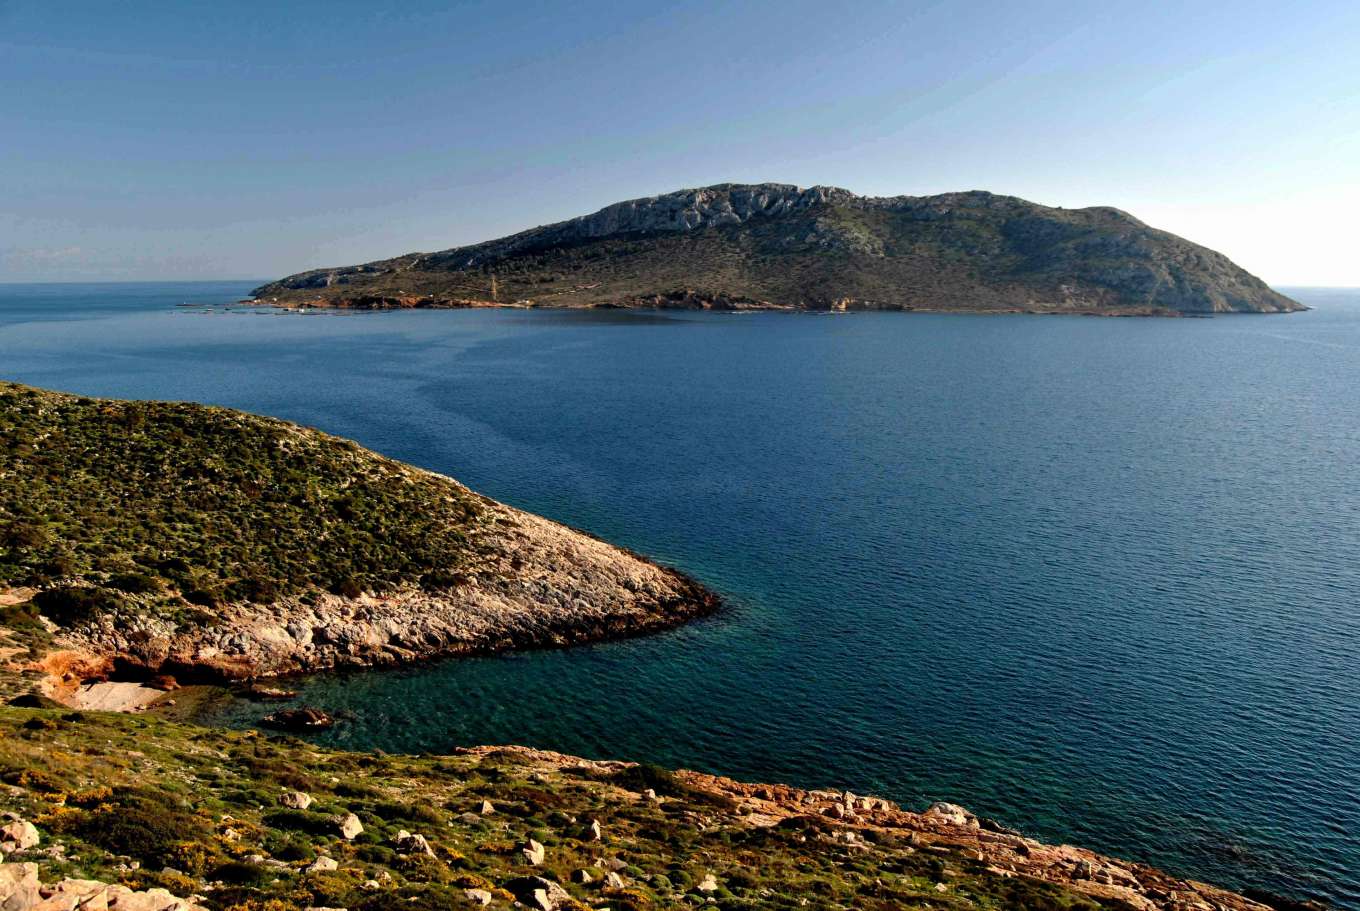 Island of Patroklos - Greece, Europe - Private Islands for Sale